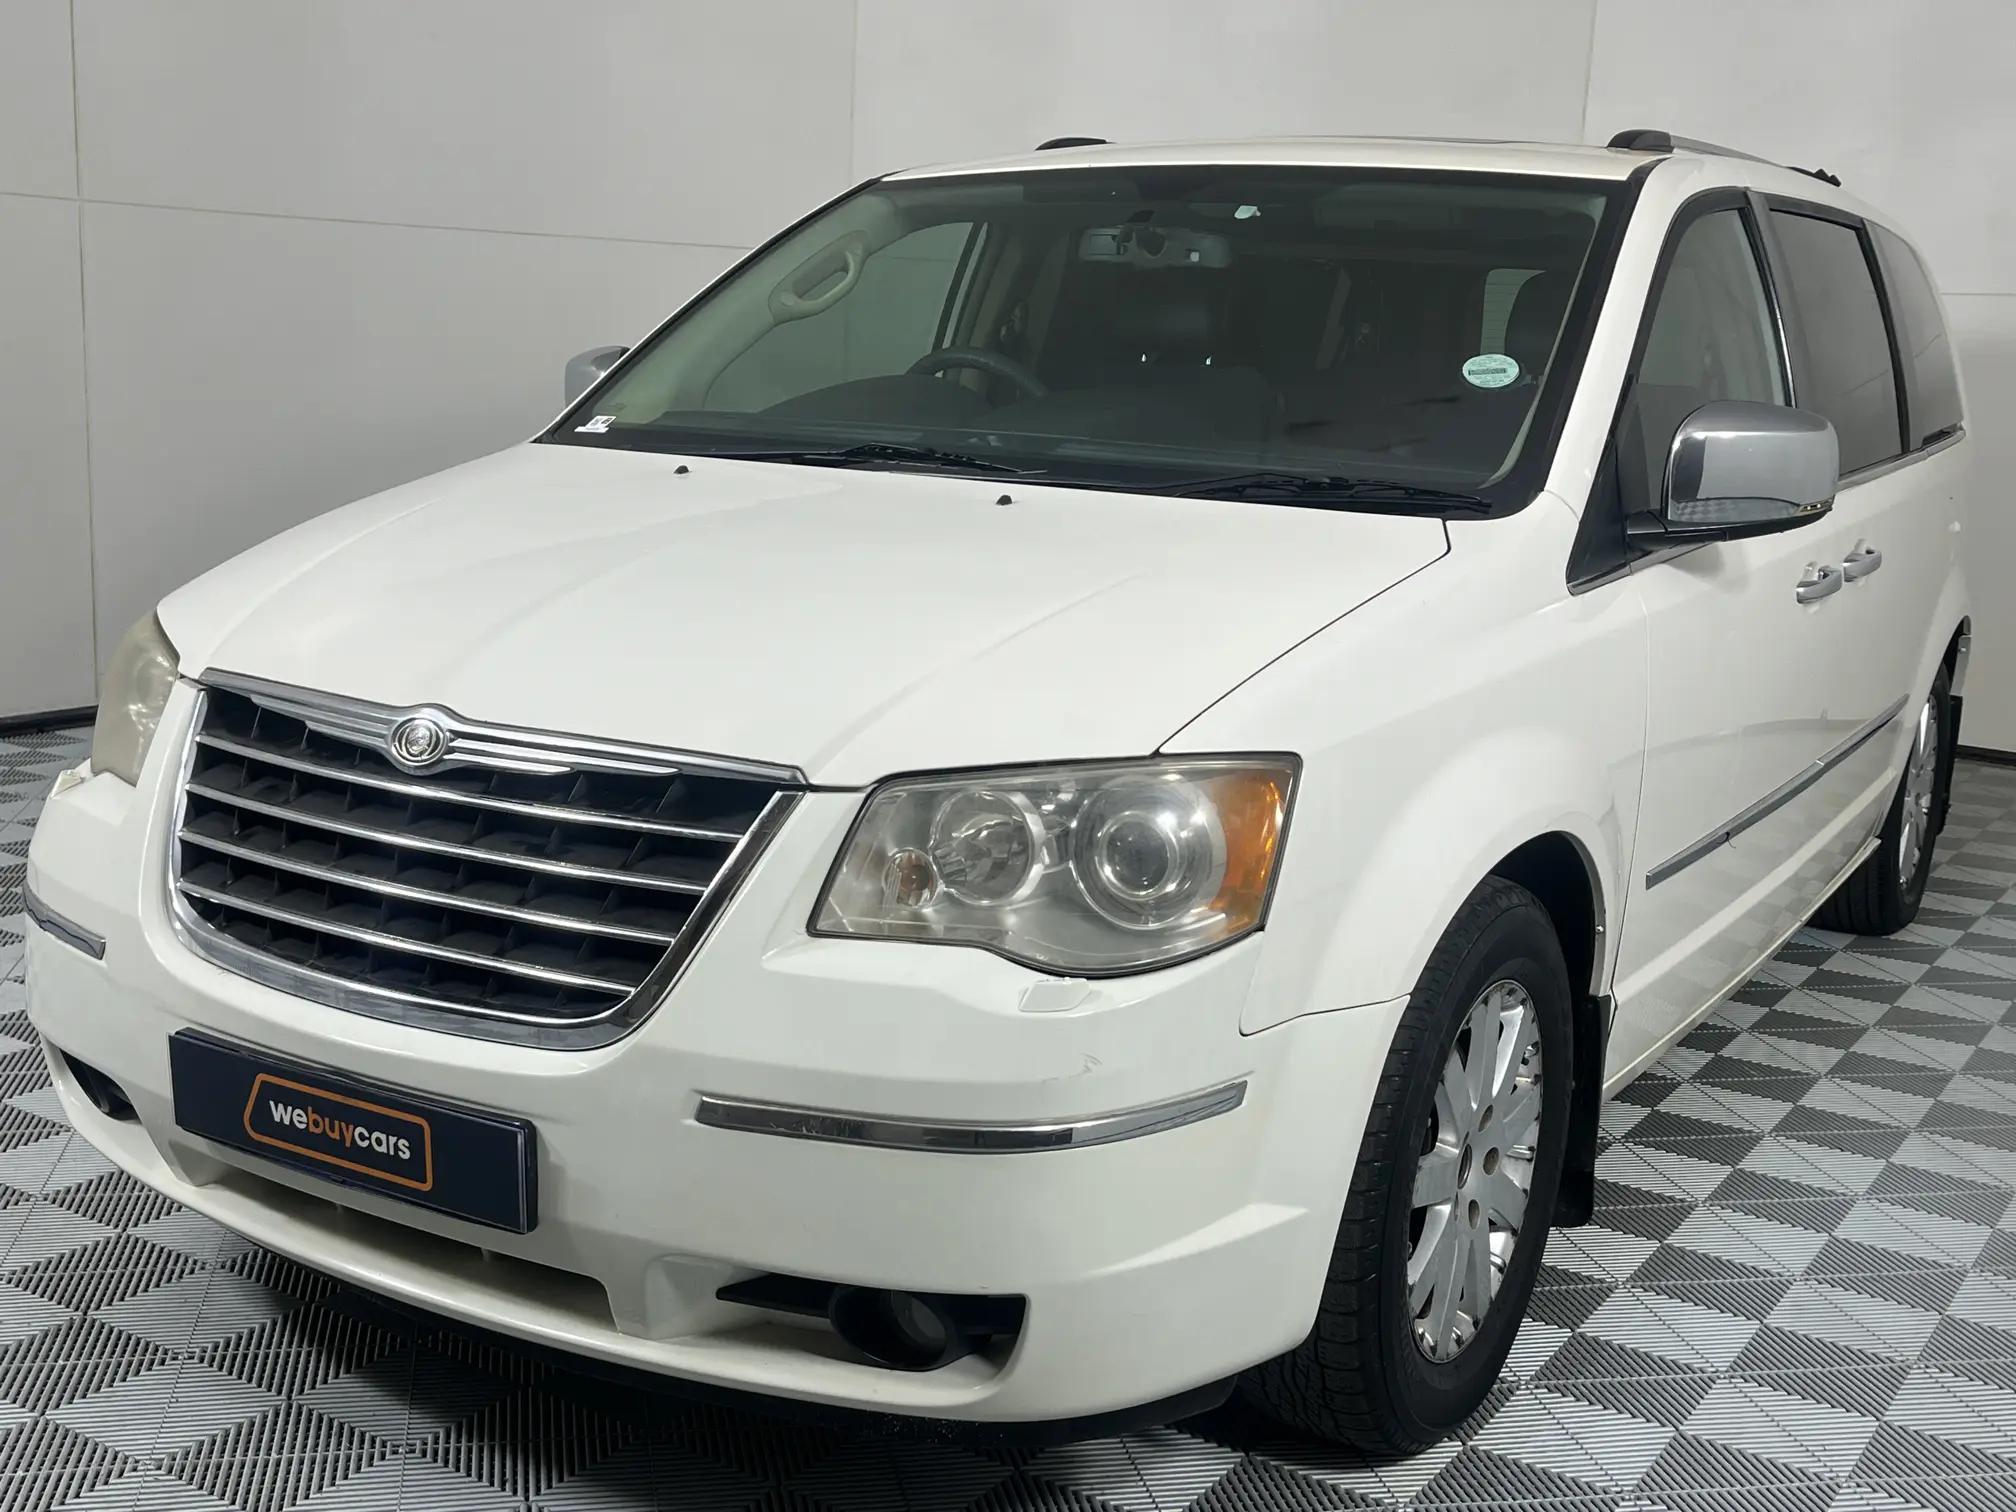 Chrysler Grand Voyager 2.8 (120 kW) Limited Auto